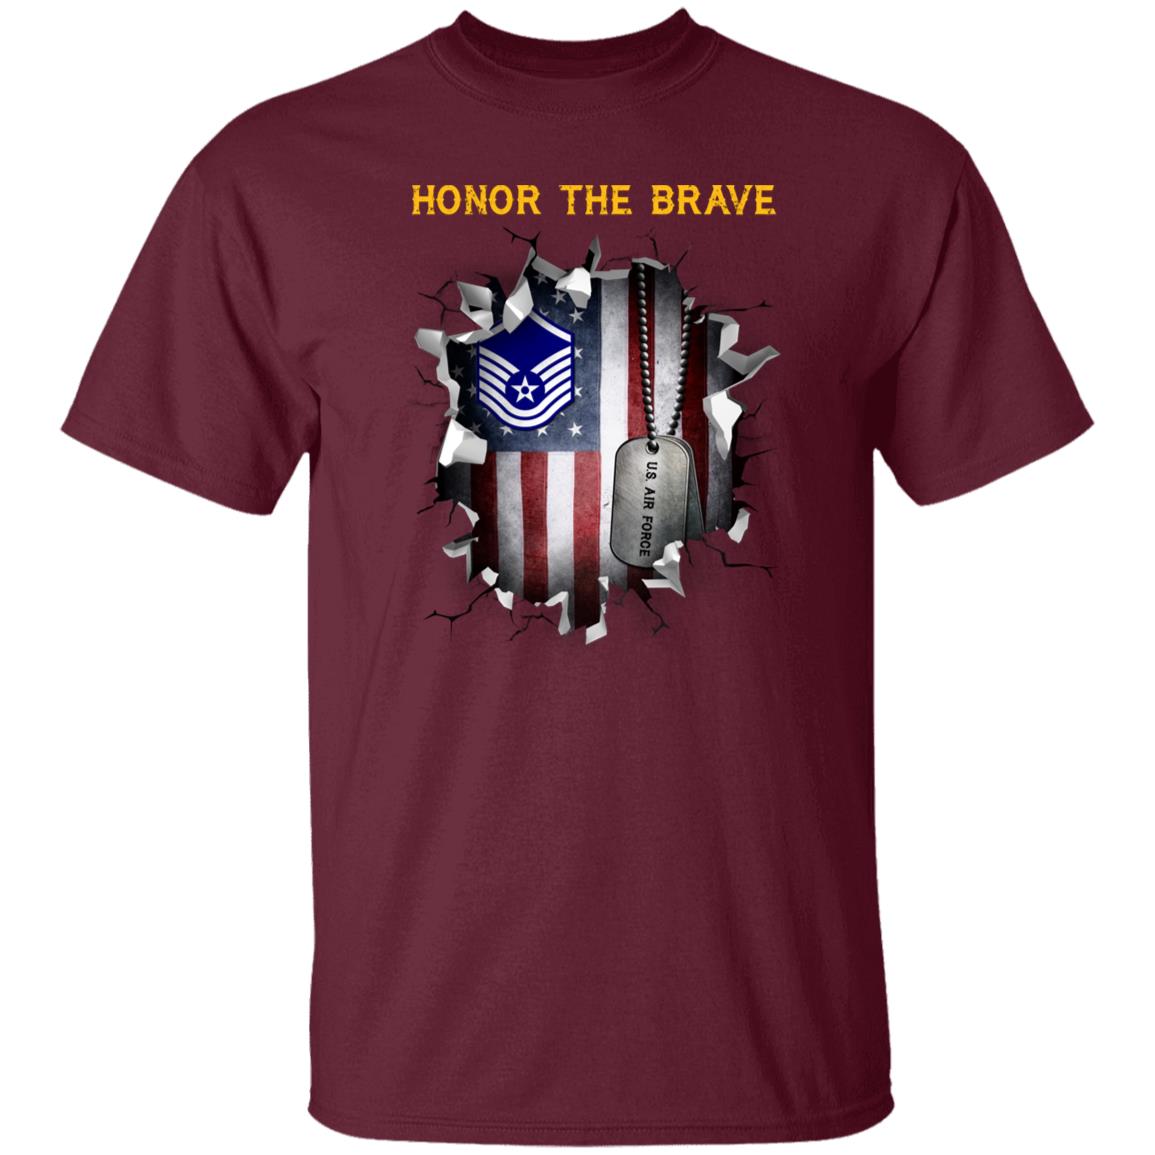 US Air Force E-7 Master Sergeant MSgt E7 Noncommissioned Officer  - Honor The BraveAF  - Honor The Brave - Honor The Brave Front Shirt